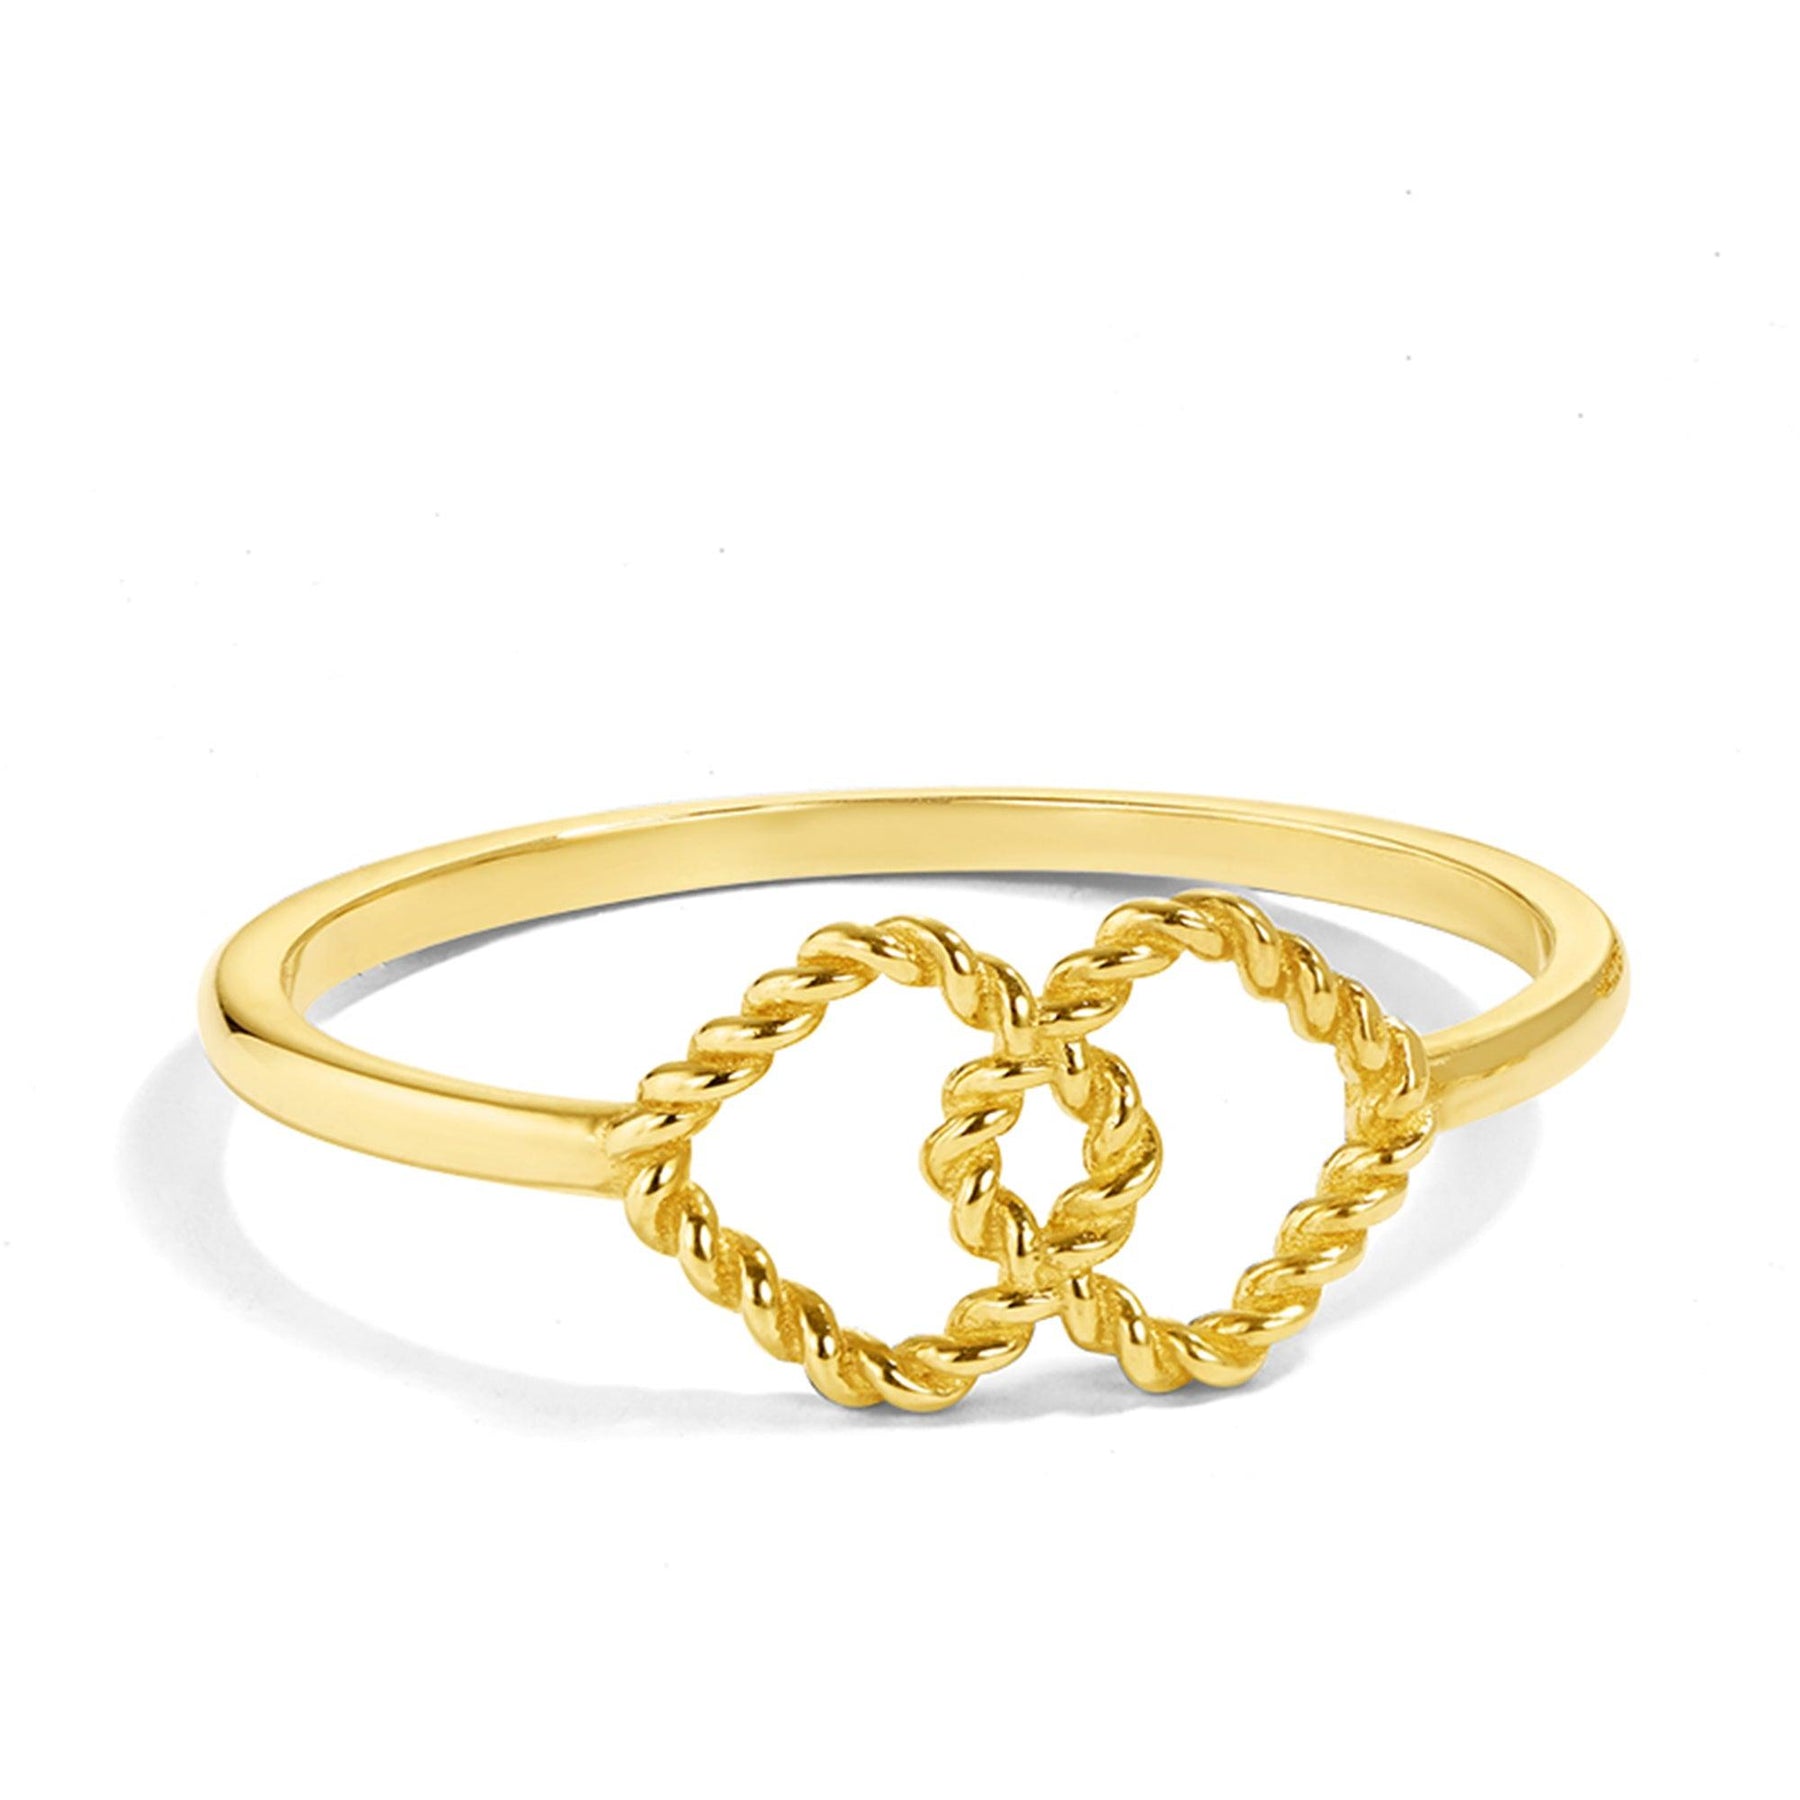 Intertwined Rope Ring in 9ct Yellow Gold - Wallace Bishop